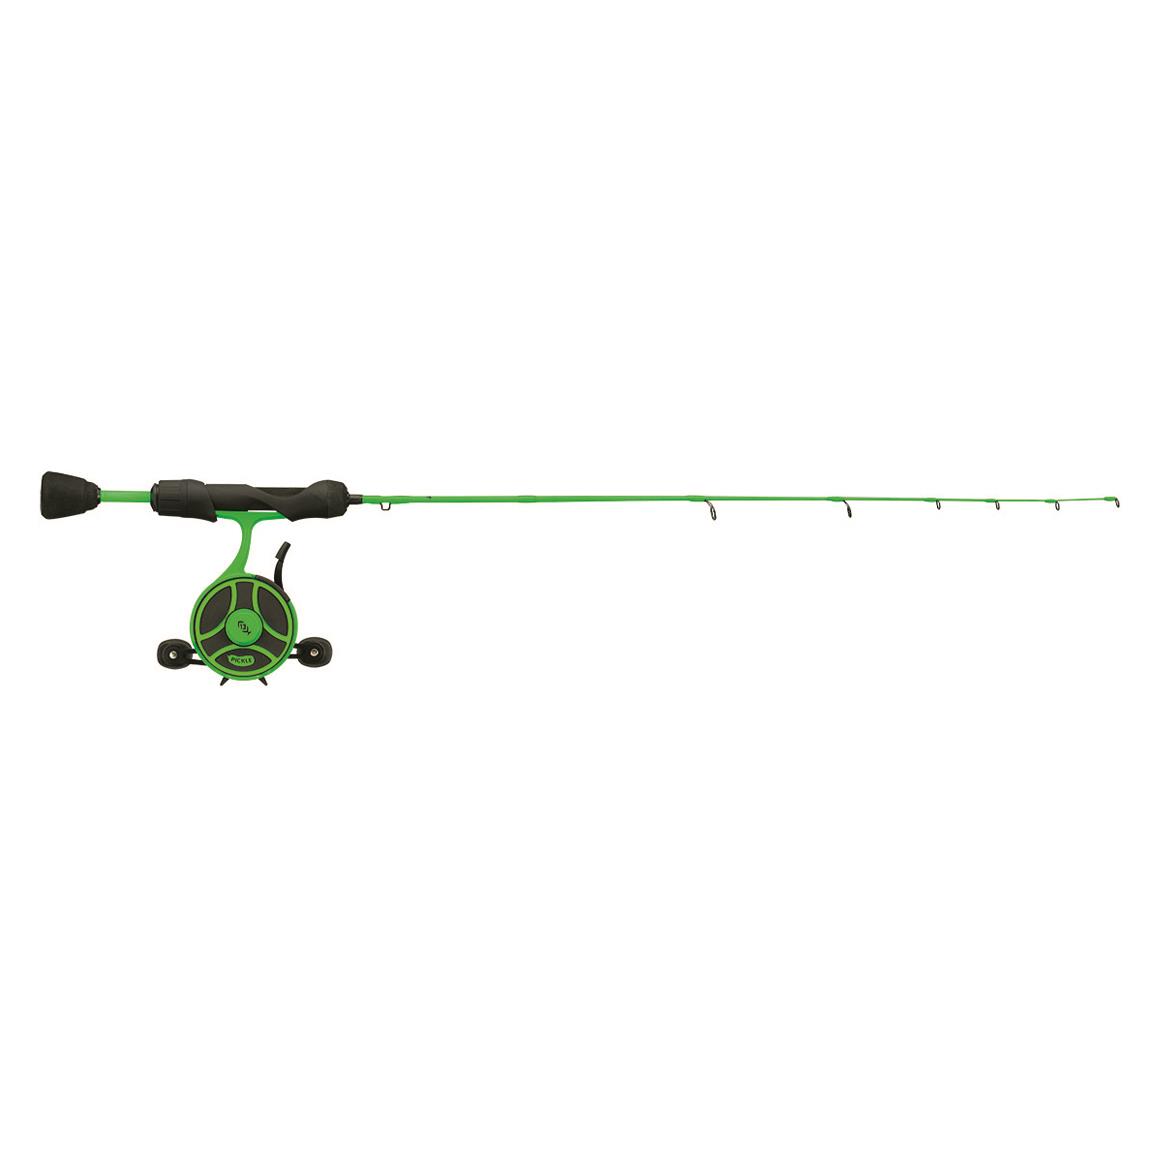 Pflueger President Inline Ice Combo, 24 Length, Ultra Light Power -  724147, Ice Fishing Combos at Sportsman's Guide